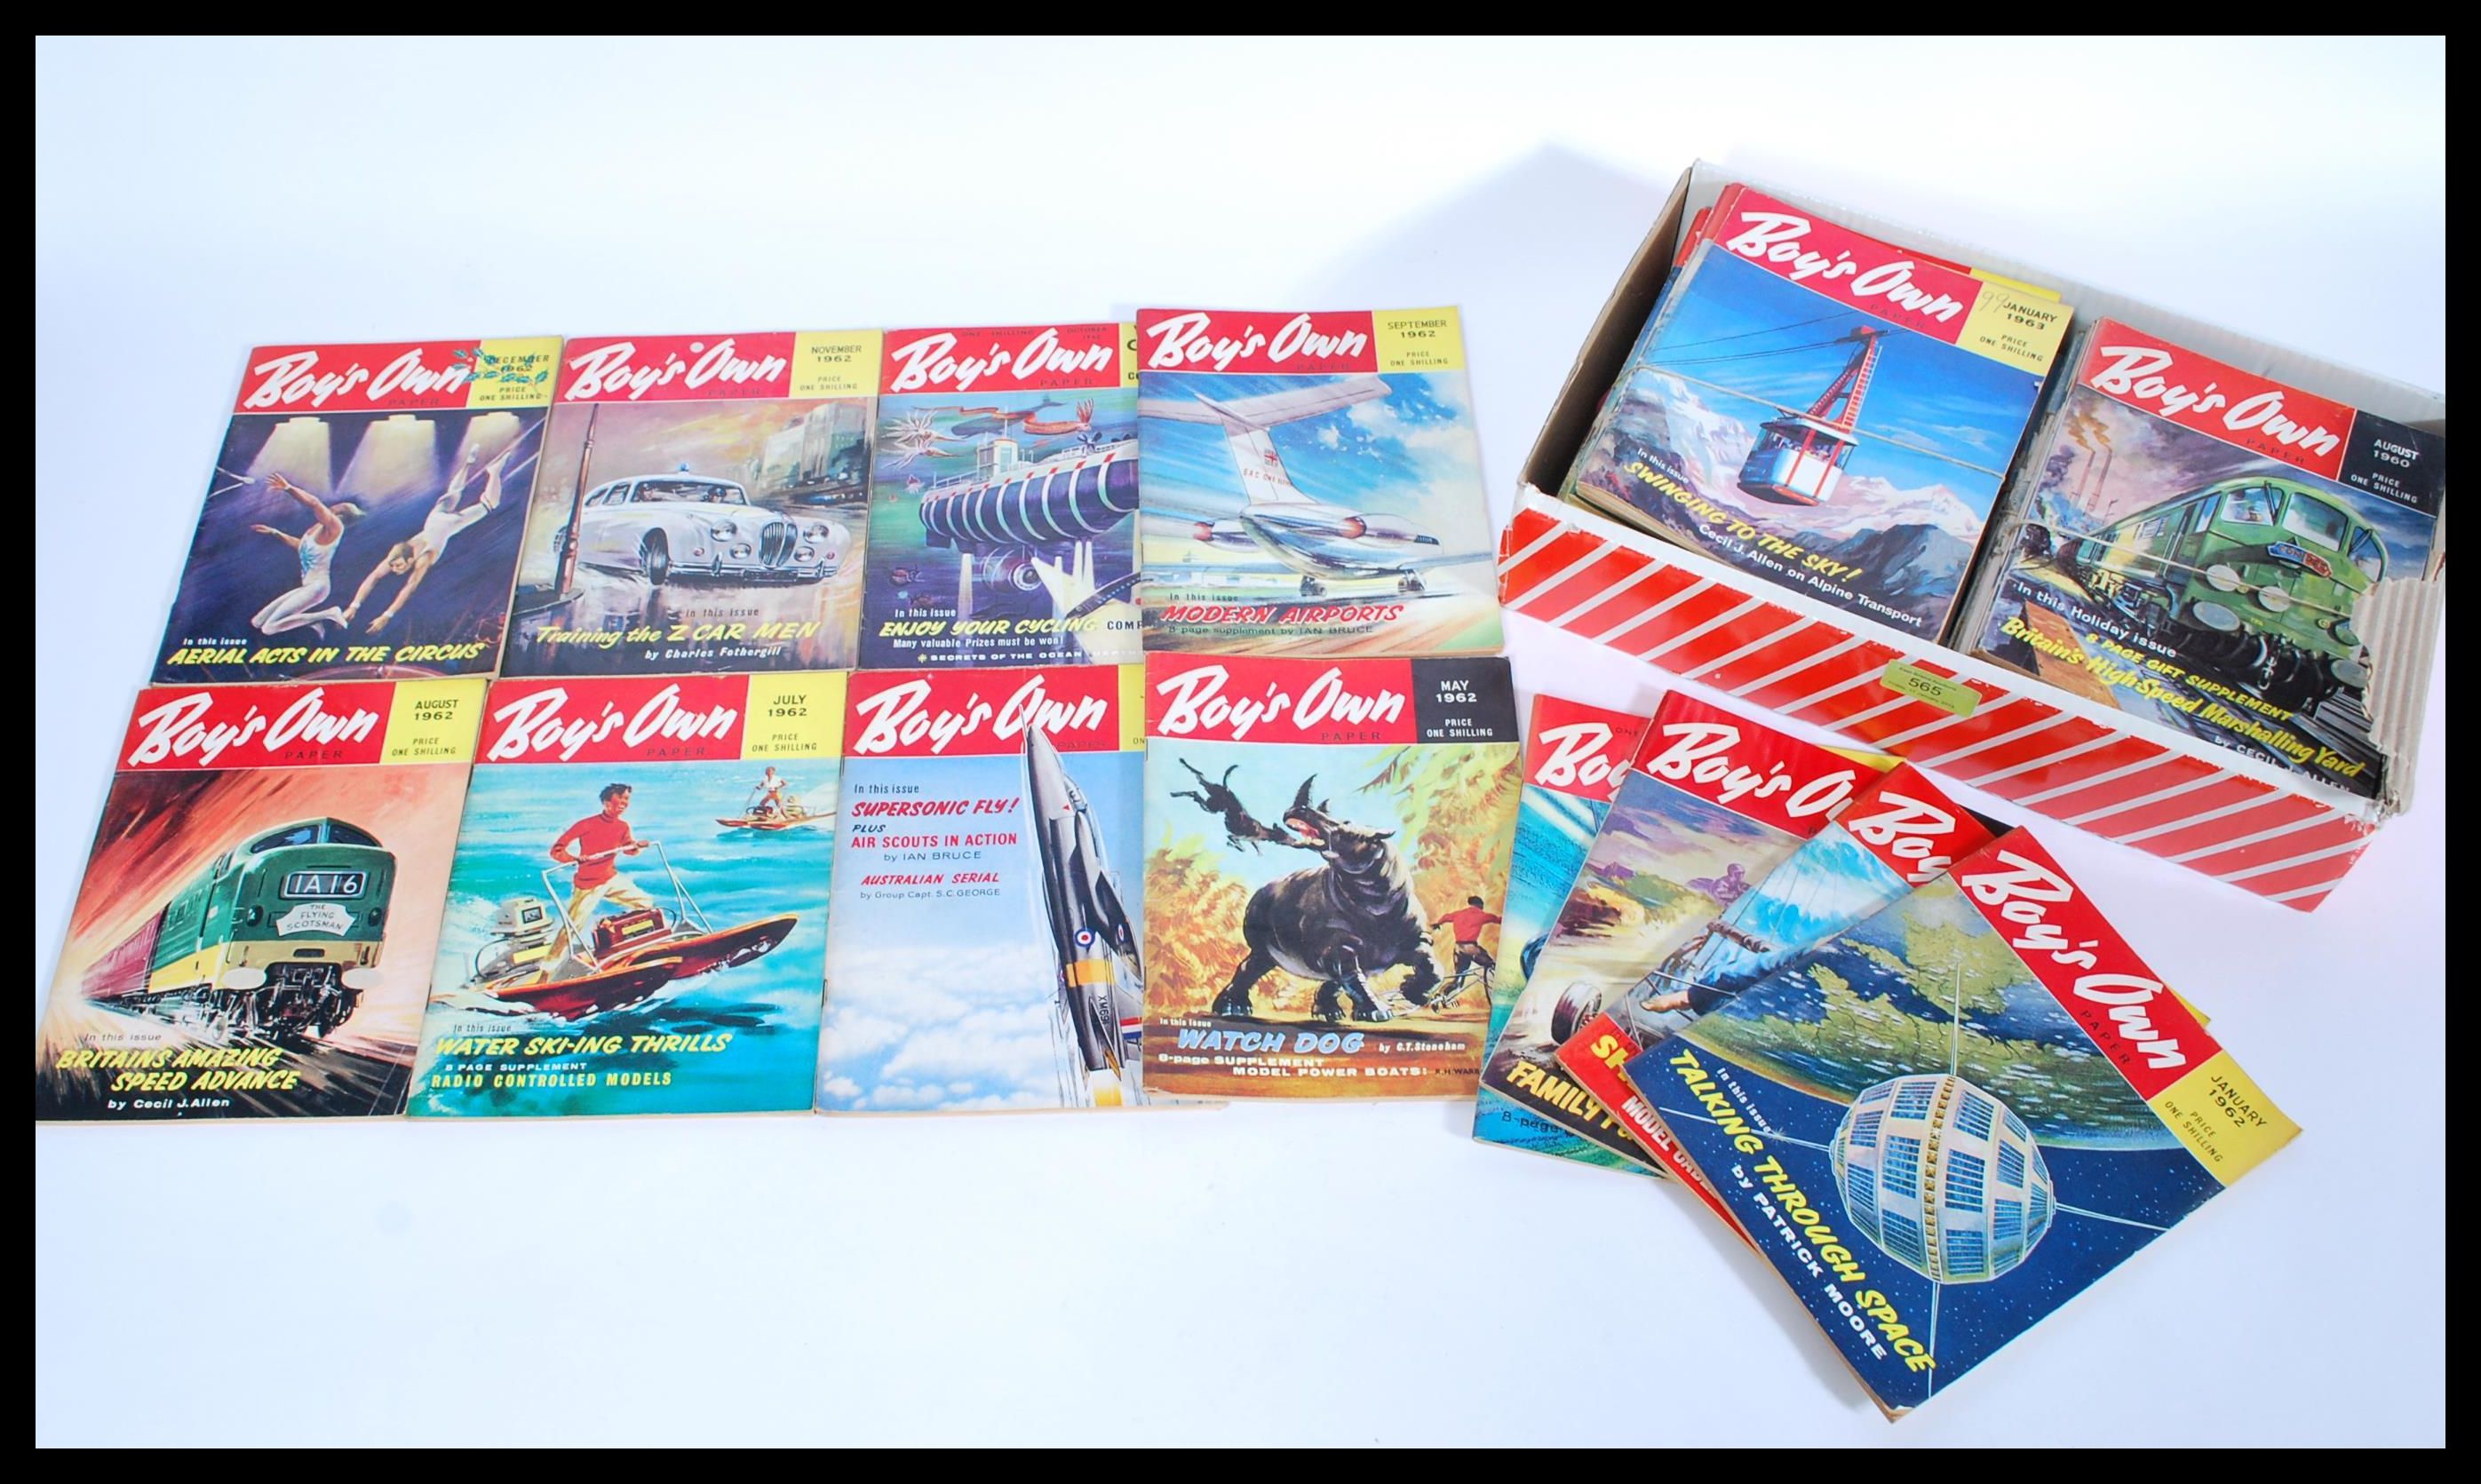 A collection of vintage mid century Boys Own magaz